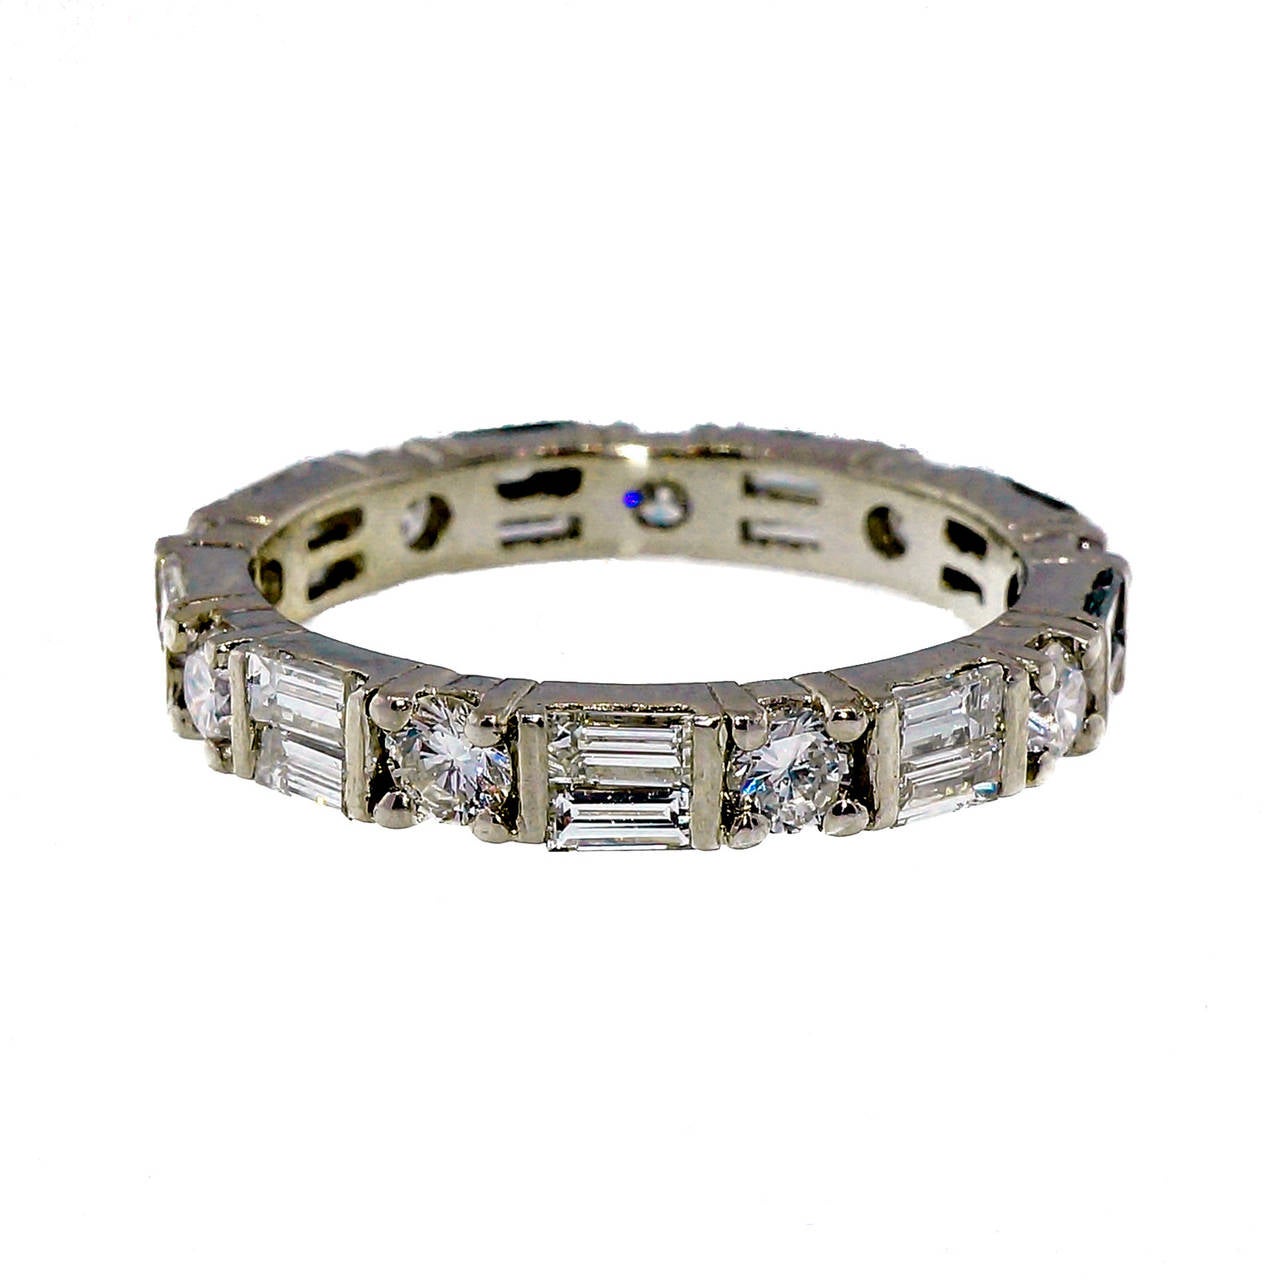 Clean crisp design wedding Eternity ring with 2 side by side baguette diamonds separated by one brilliant cut diamond all around.

18 baguette cut diamonds, approx. total weight 1.50cts, F, VS
9 round brilliant cut diamonds, approx. total weight